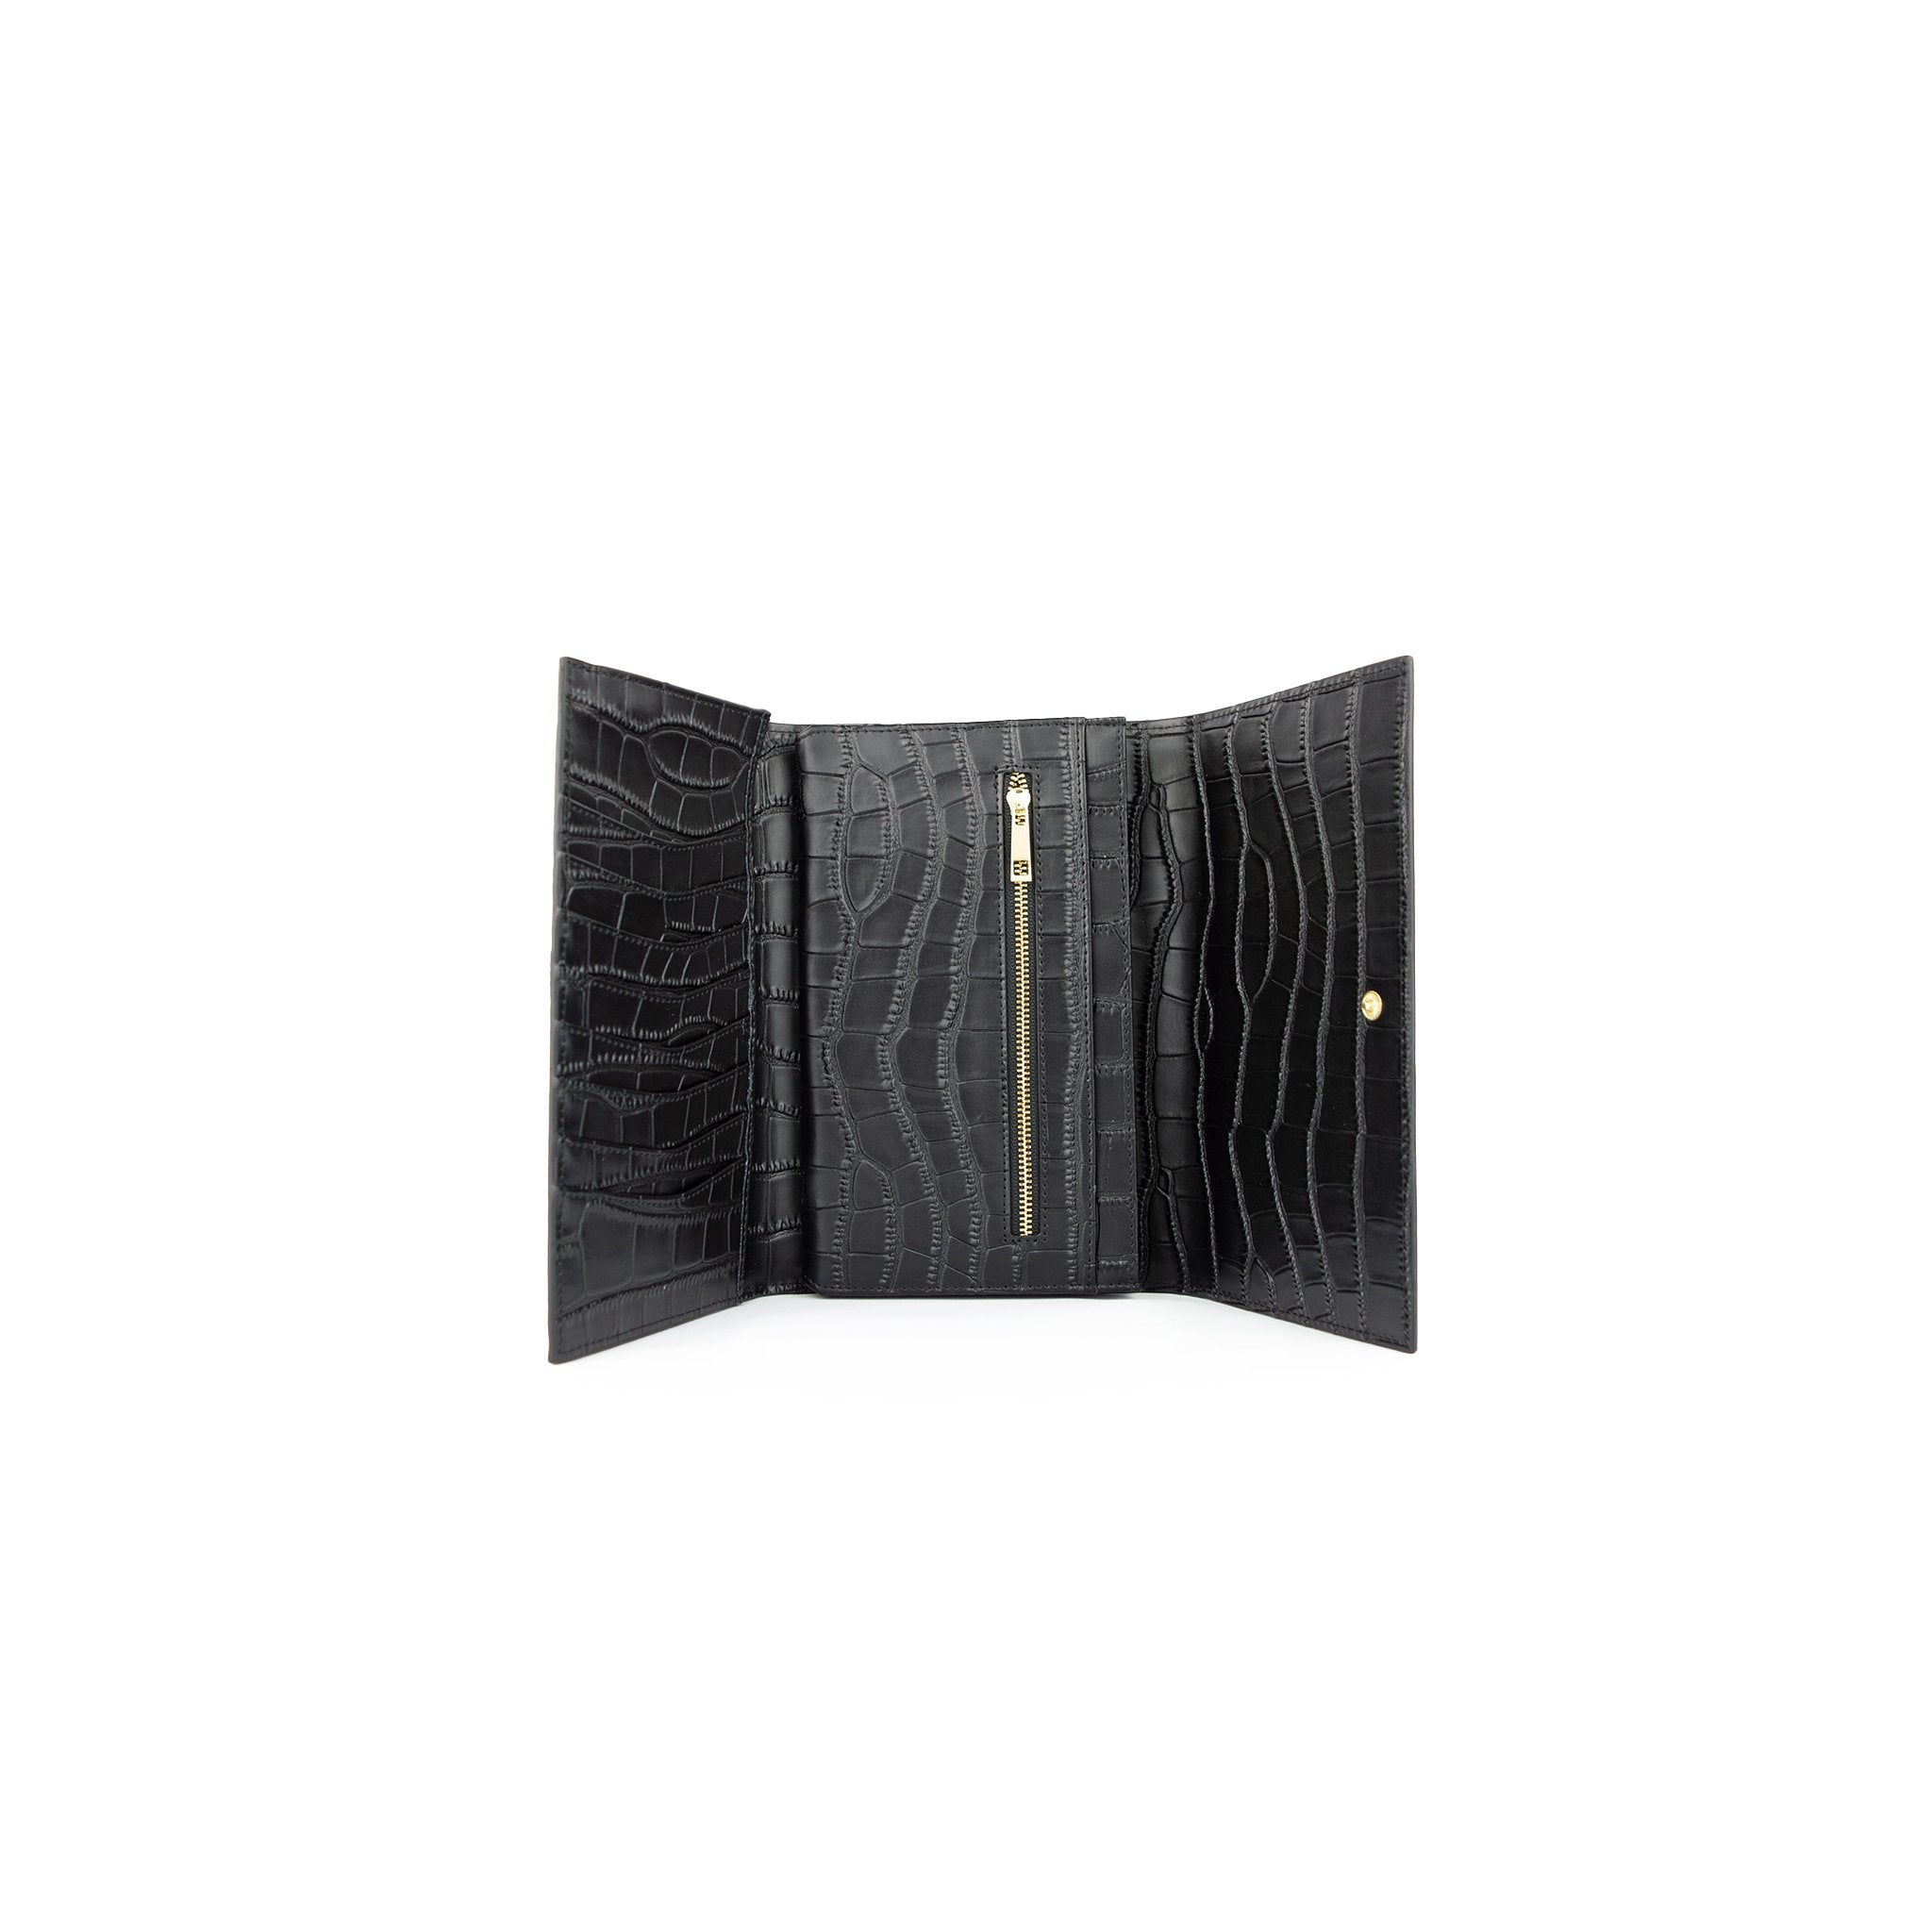 Personalised Wallet Clutch - Black Croc Leather